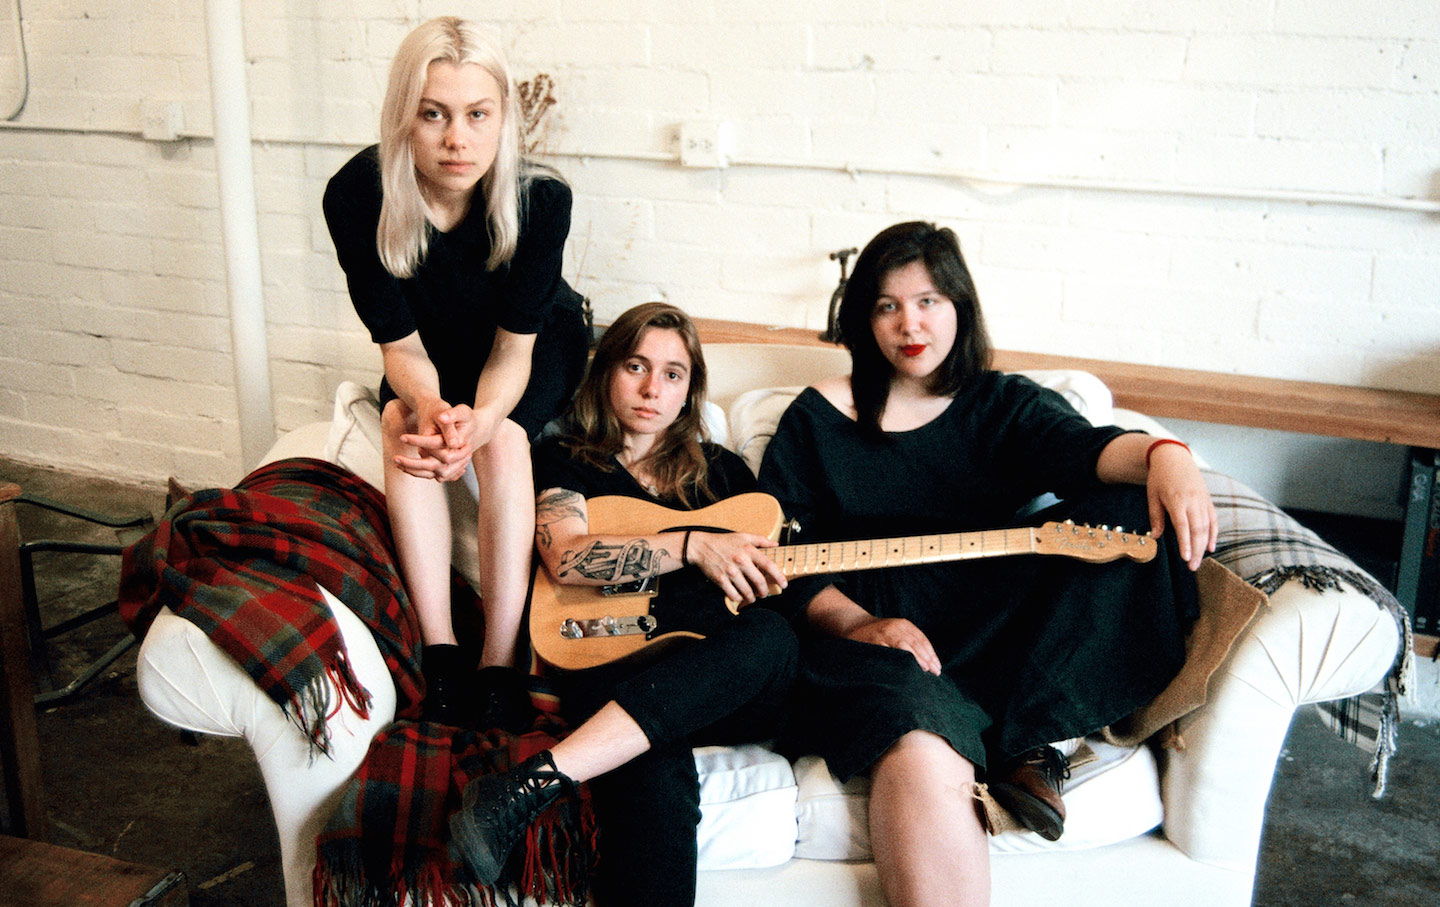 Salt In The Wound Song of the Day Julien Baker Phoebe Bridgers and Lucy Dacus